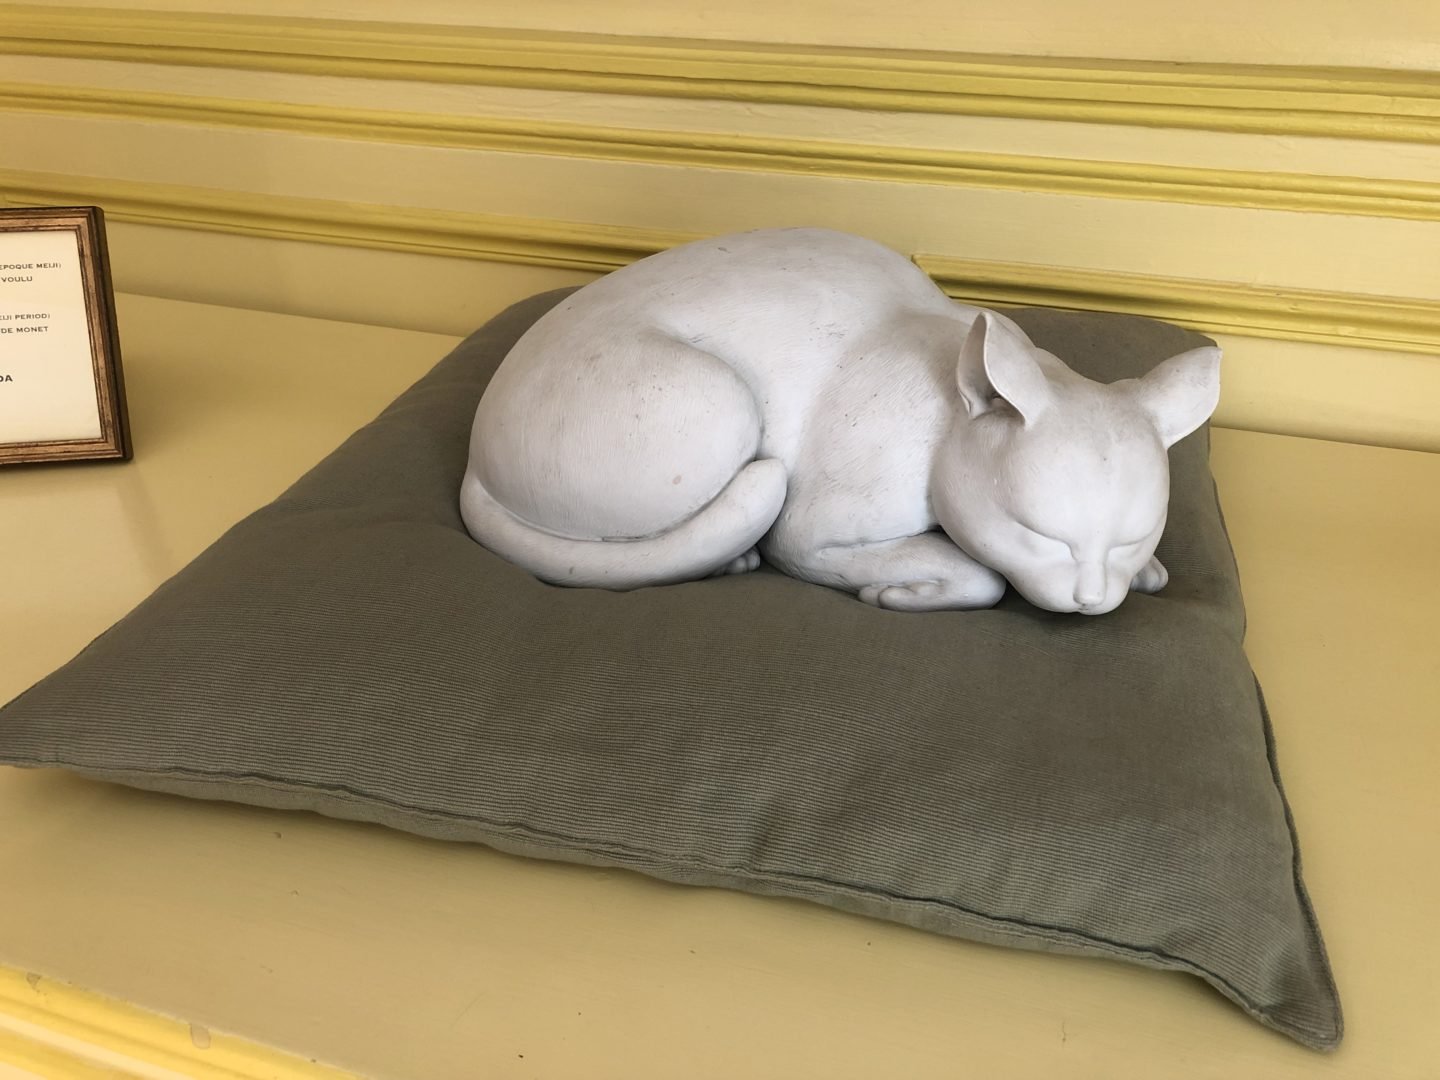 Monet's cat, There is also a biscuitware cat "The Japanese Cat" that was once owned by monet in the dining room. It has kindly regained its place in the home by its previous owner Monsieur Hideyuki Wada.